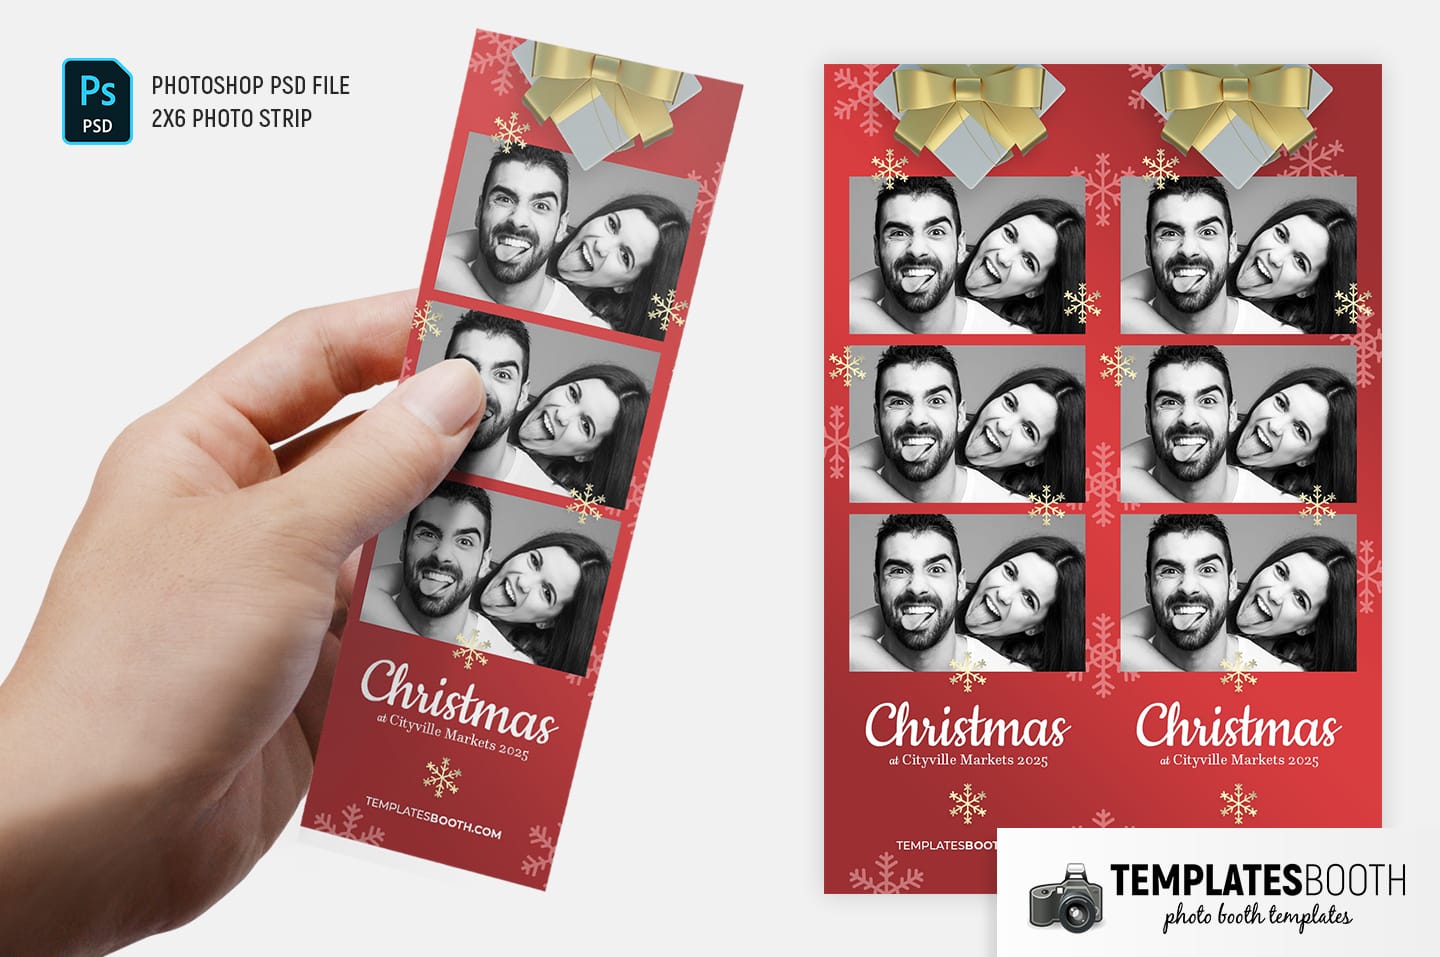 Christmas Gift Photo Booth Template (2x6 photo strip)